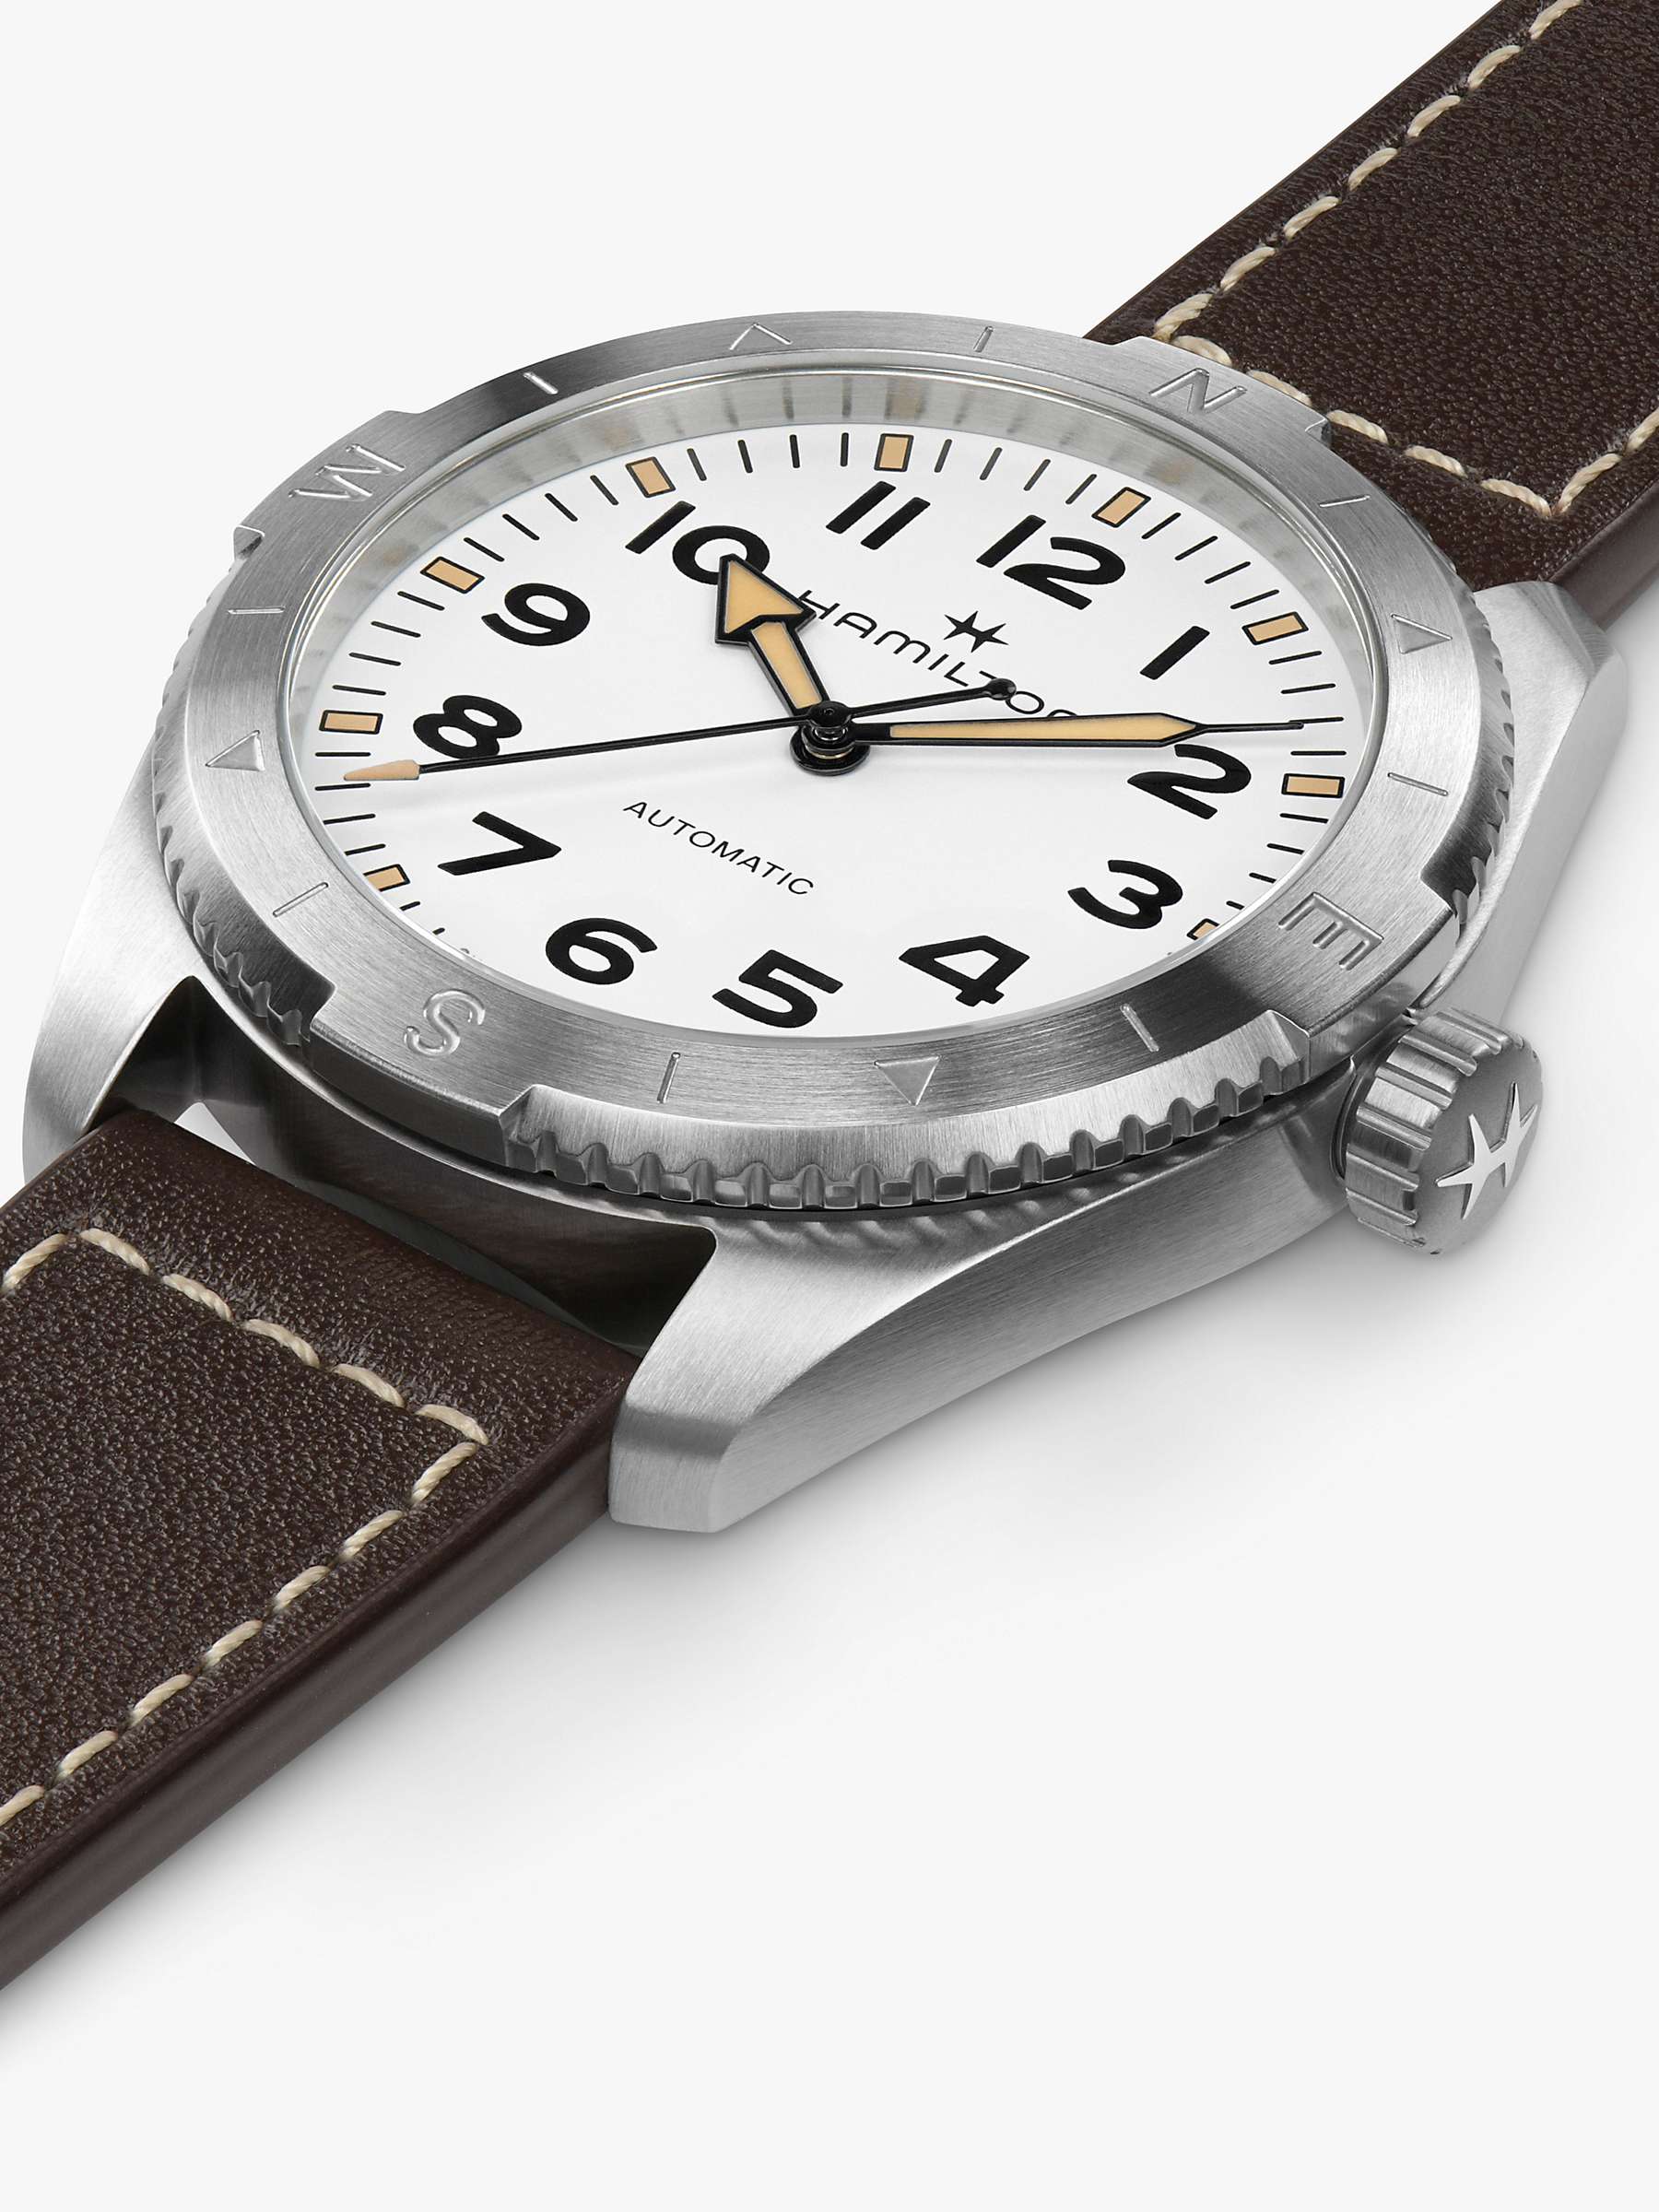 Buy Hamilton Unisex Khaki Field Expedition Automatic Leather Strap Watch Online at johnlewis.com